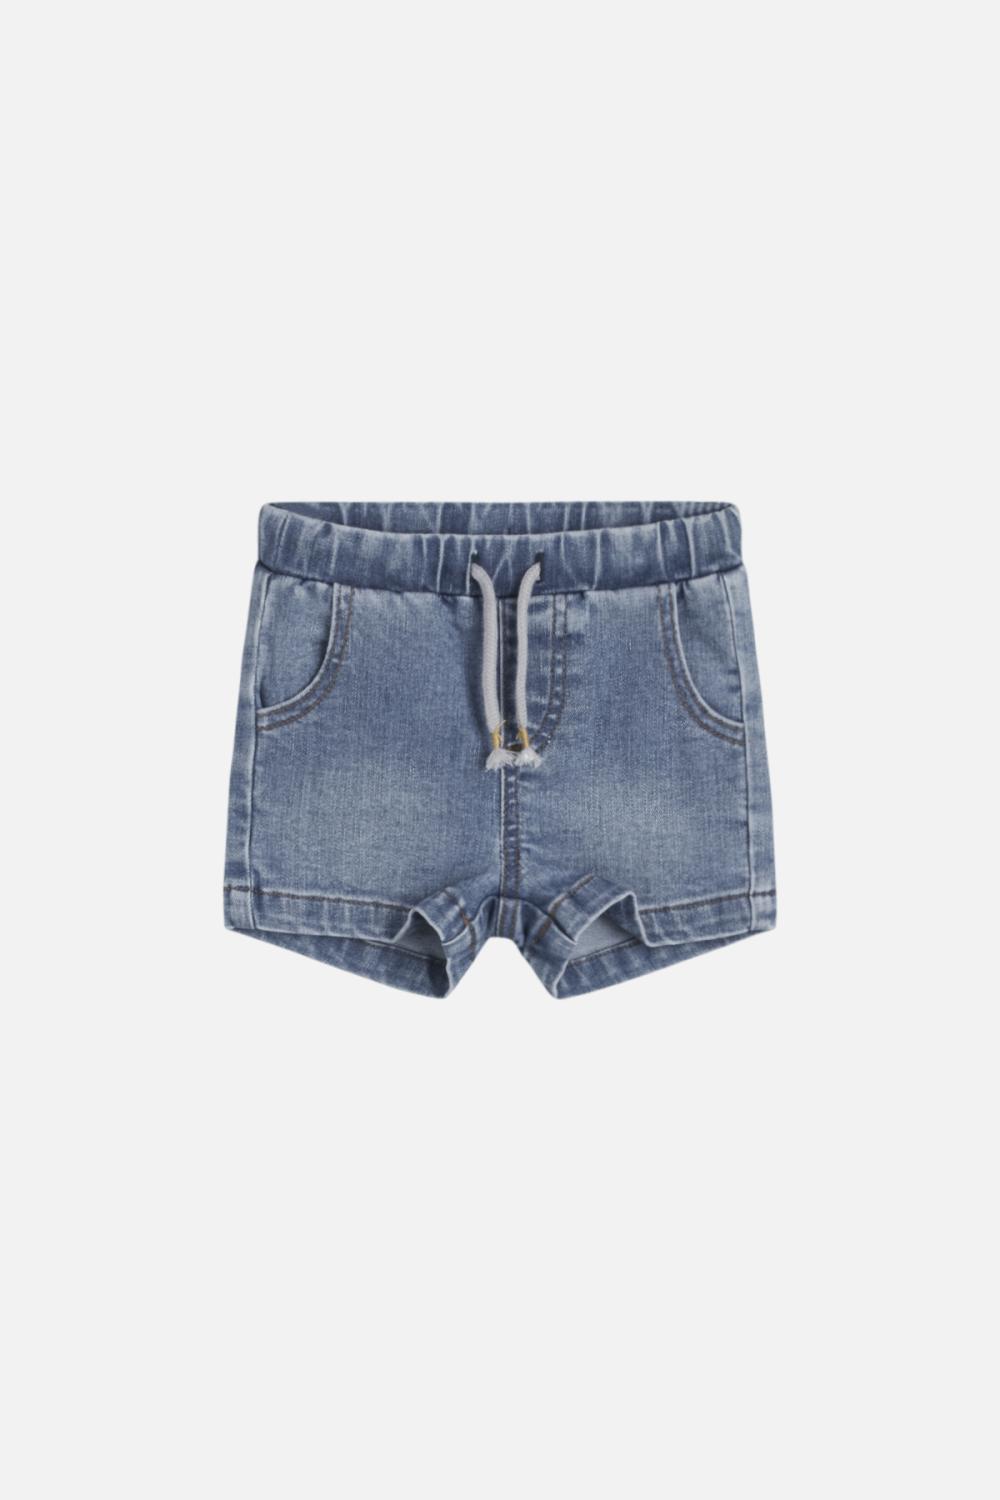 CLAIRE JEANS SHORTS HELEN